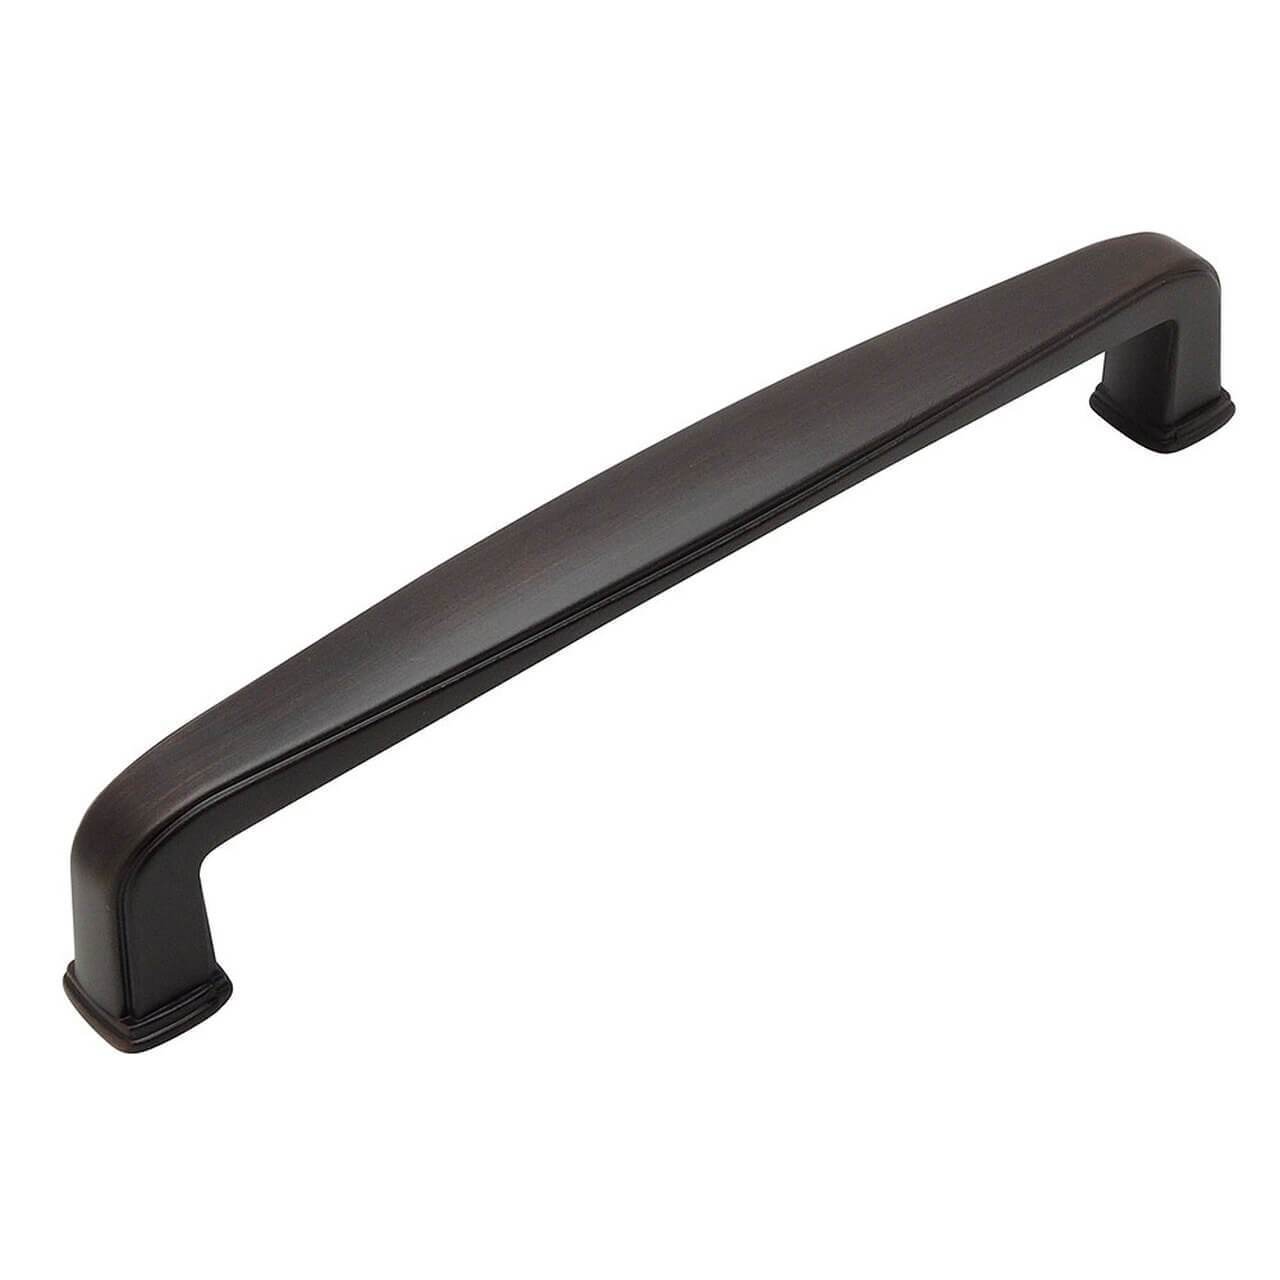 Five inch hole spacing elongated drawer pull in oil rubbed bronze finish